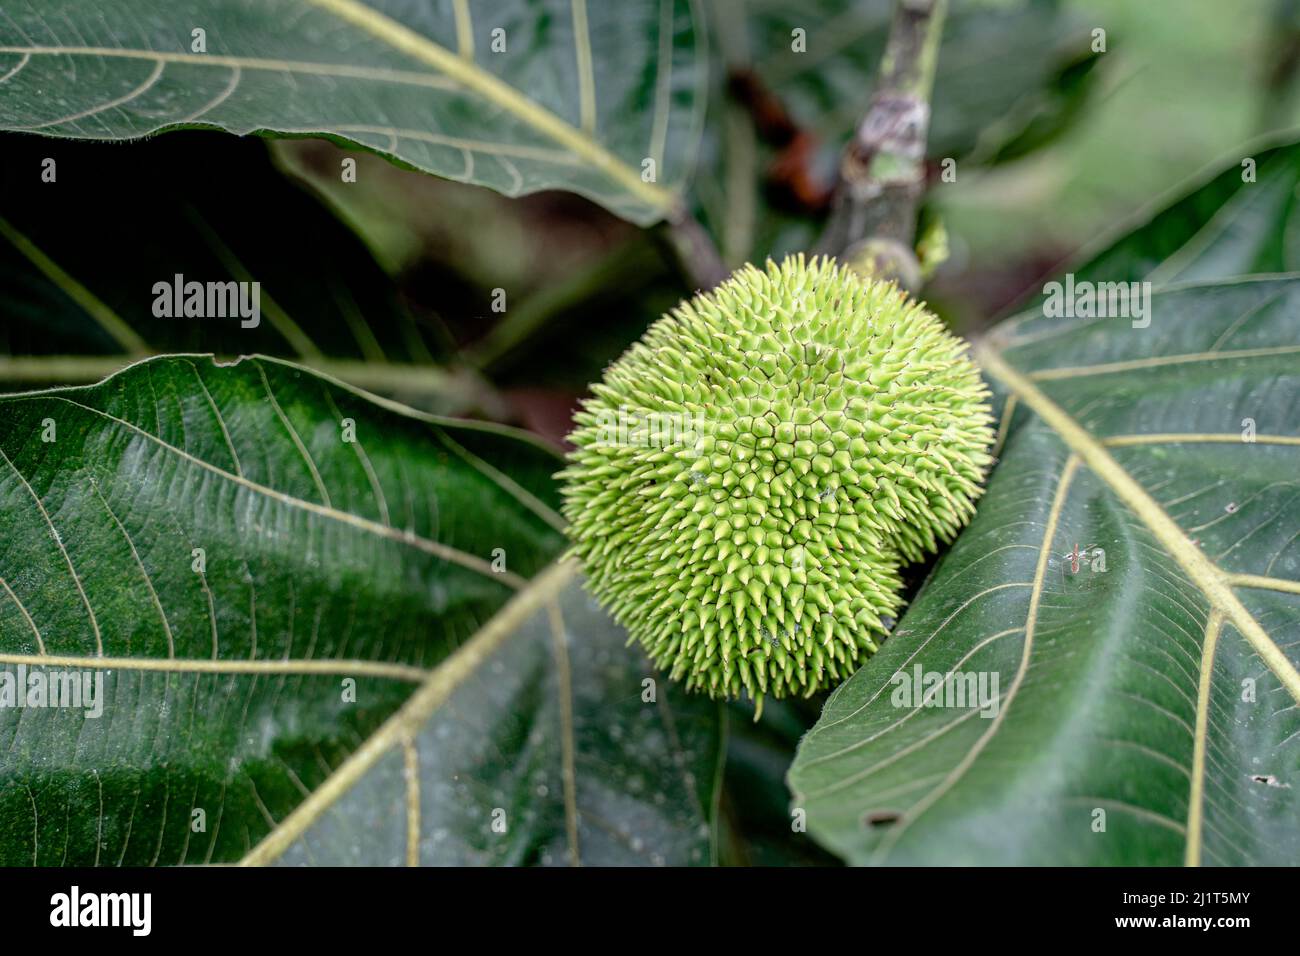 Green Jackfruit bread tree with green leaves and spiky fruit hanging on it. Stock Photo